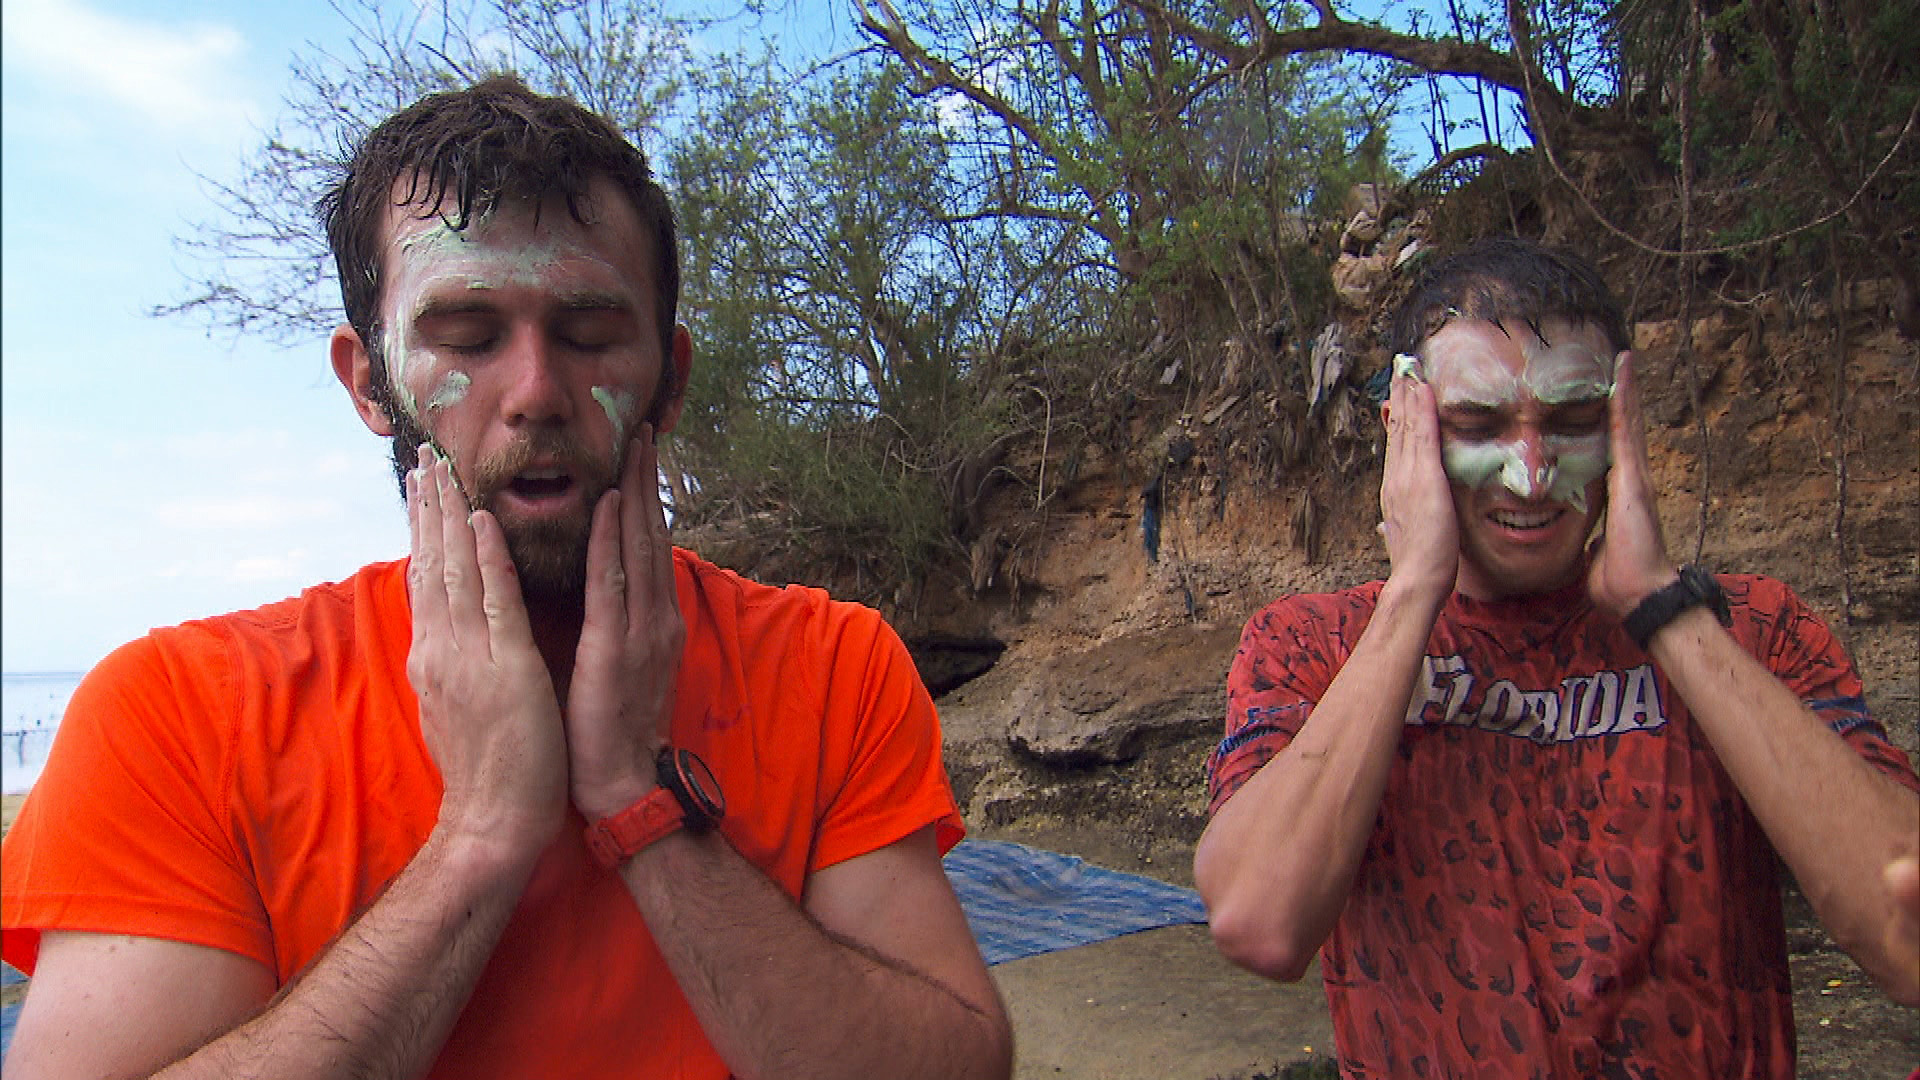 At Detour B, Brodie and Kurt sample the farmer's face cream in order to receive the next clue.